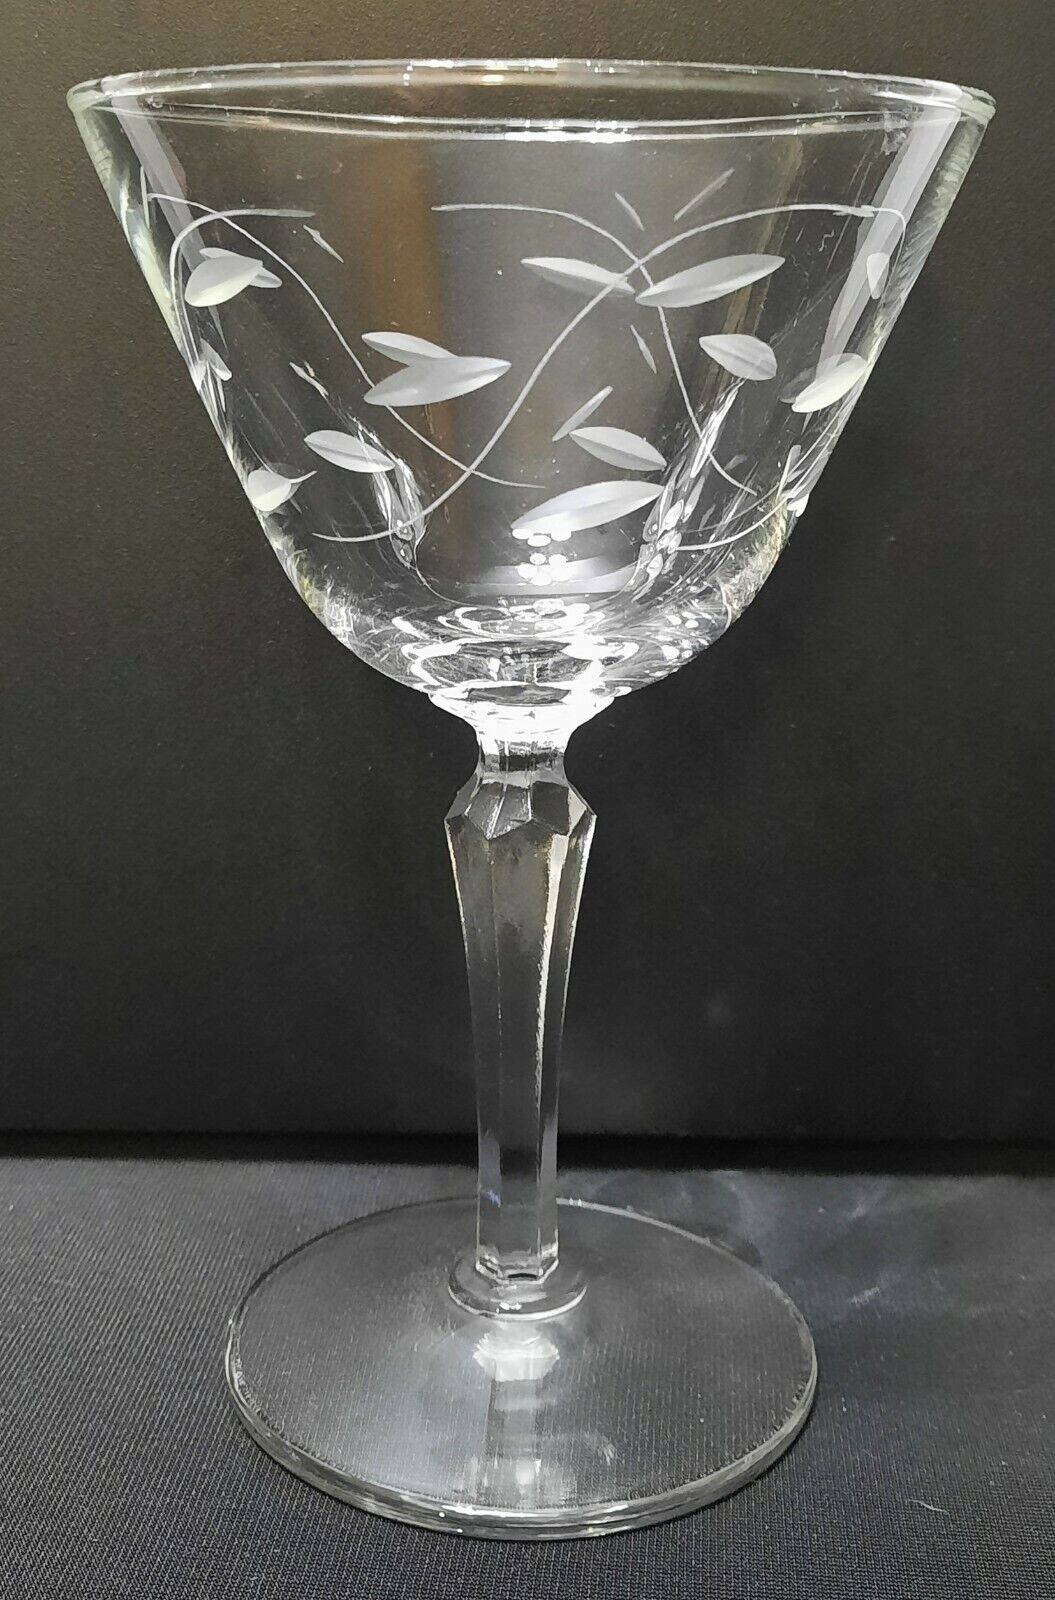 *You Pick* Libbey Glass Co. Windswept Etched Stemware (Cut 1197) [Replacements]